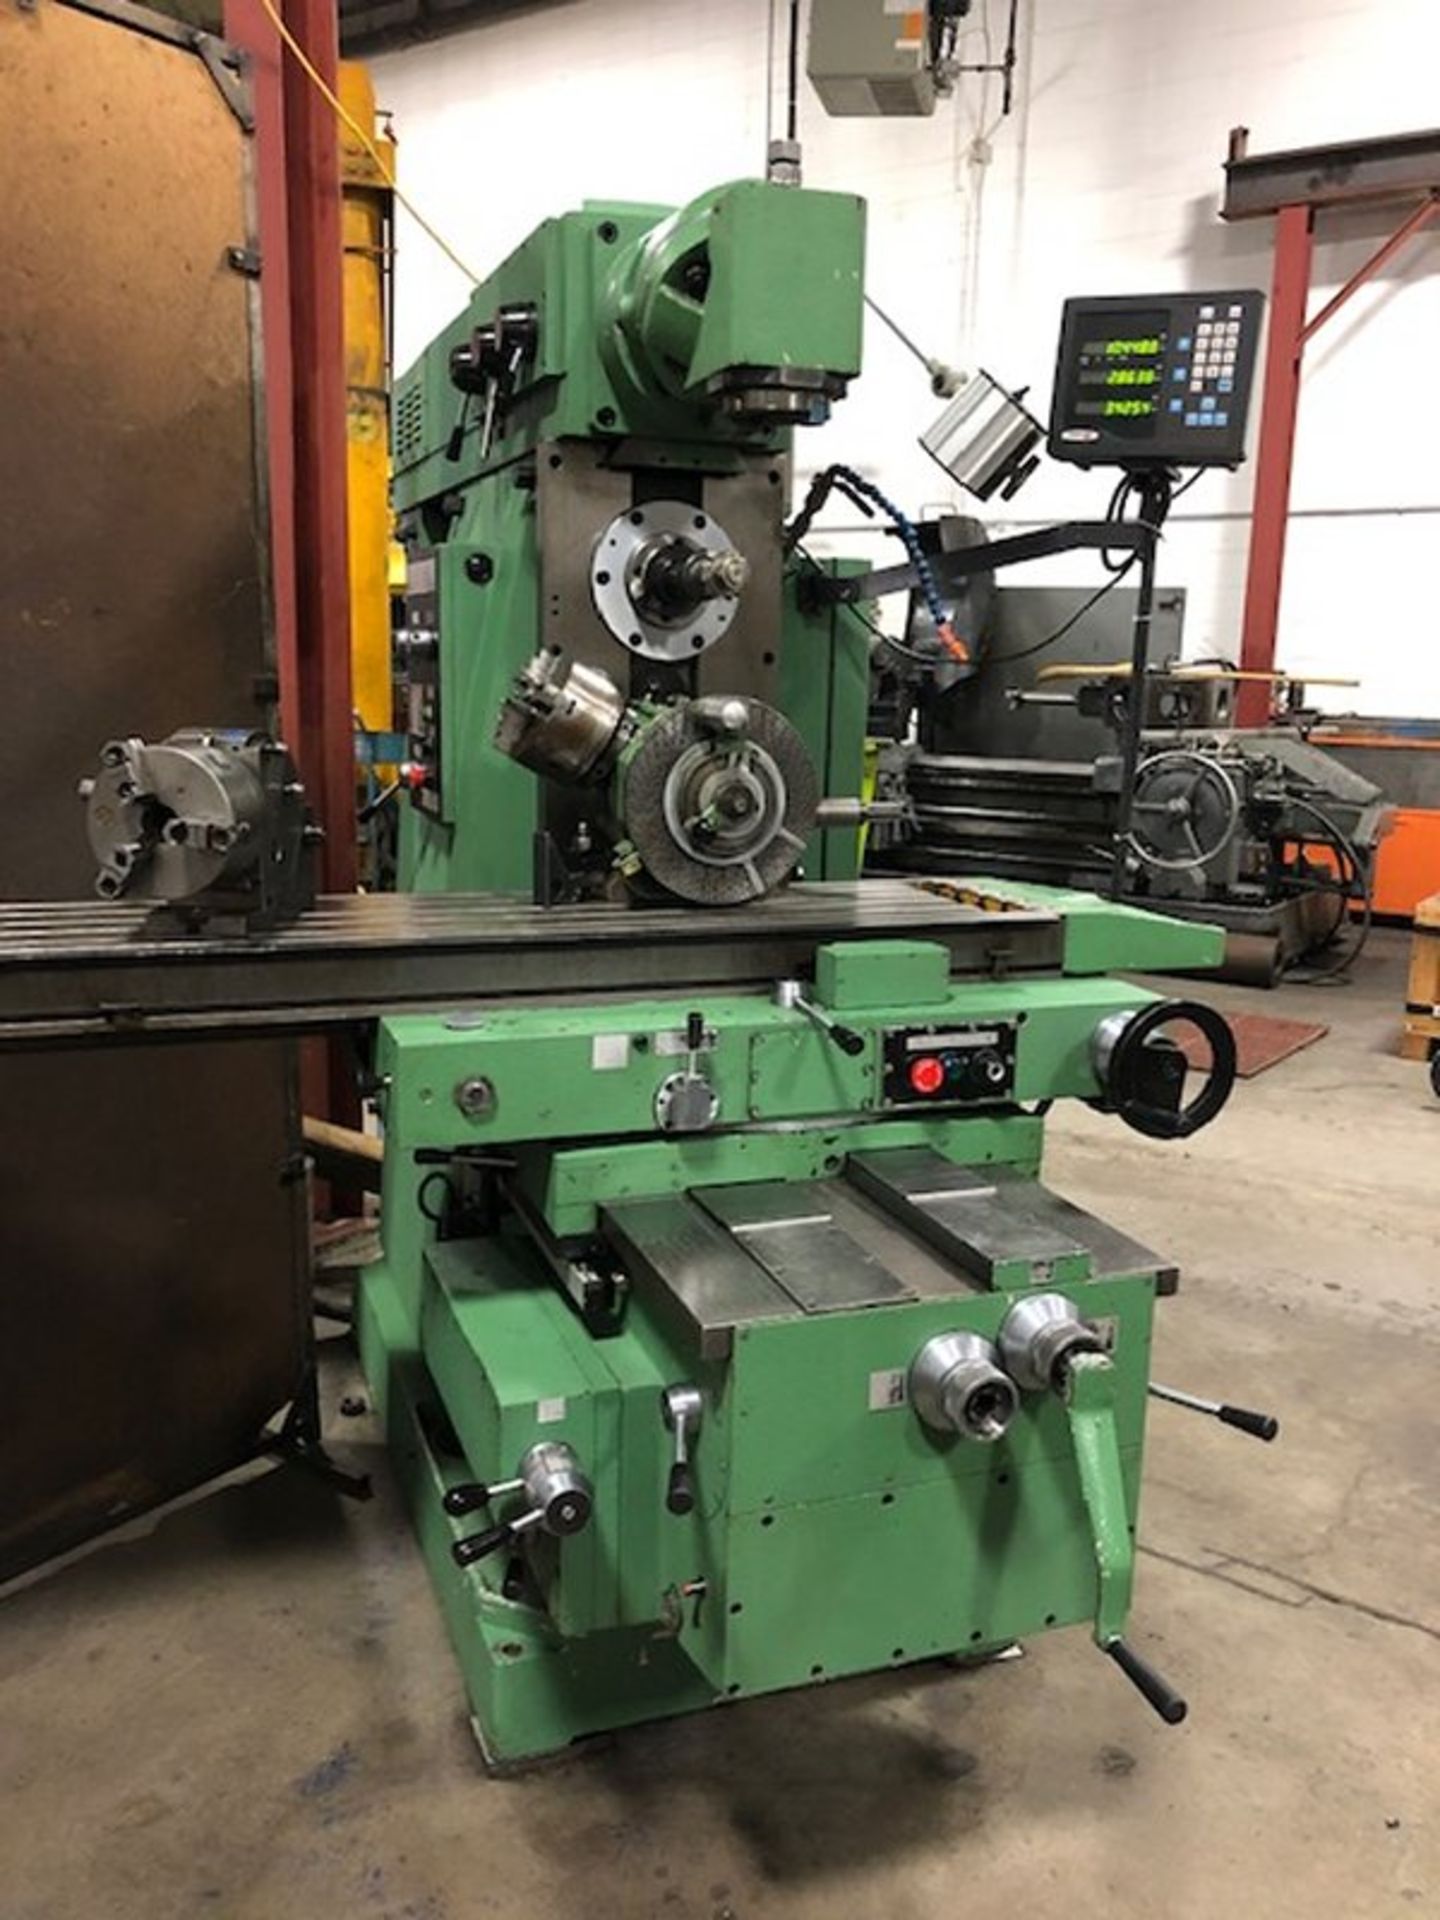 ARSENNAL FUV321M HORIZONTAL MILLING MACHINE, 12IN X 56IN BED FAGOR 3 AXIS DIGITAL READOUT - Image 2 of 7